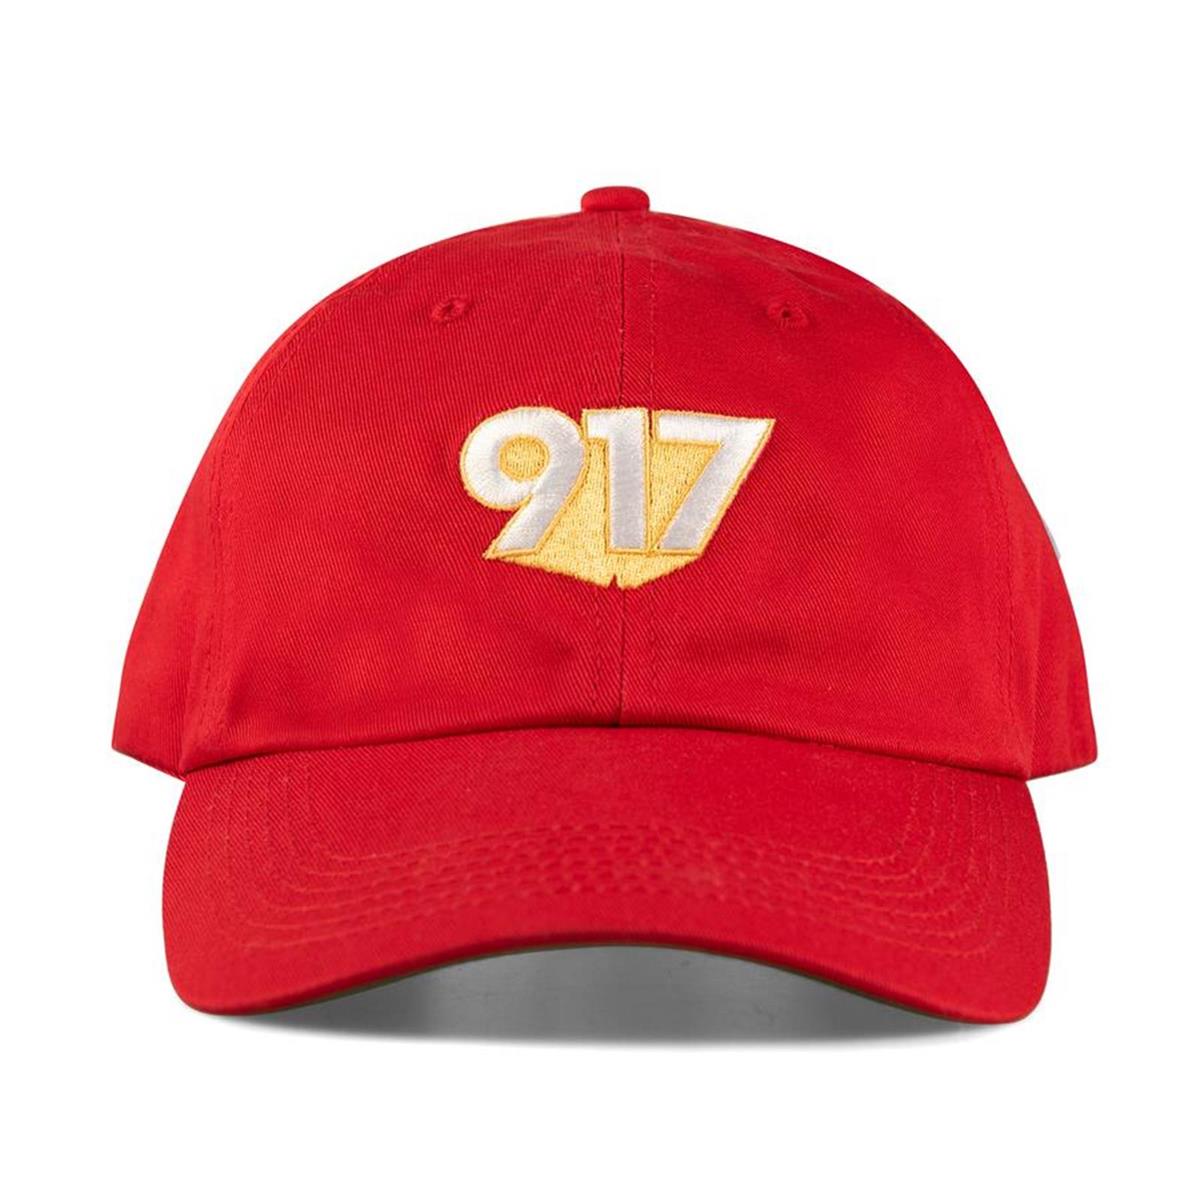 Call Me 917 - 3D Red Dad Hat